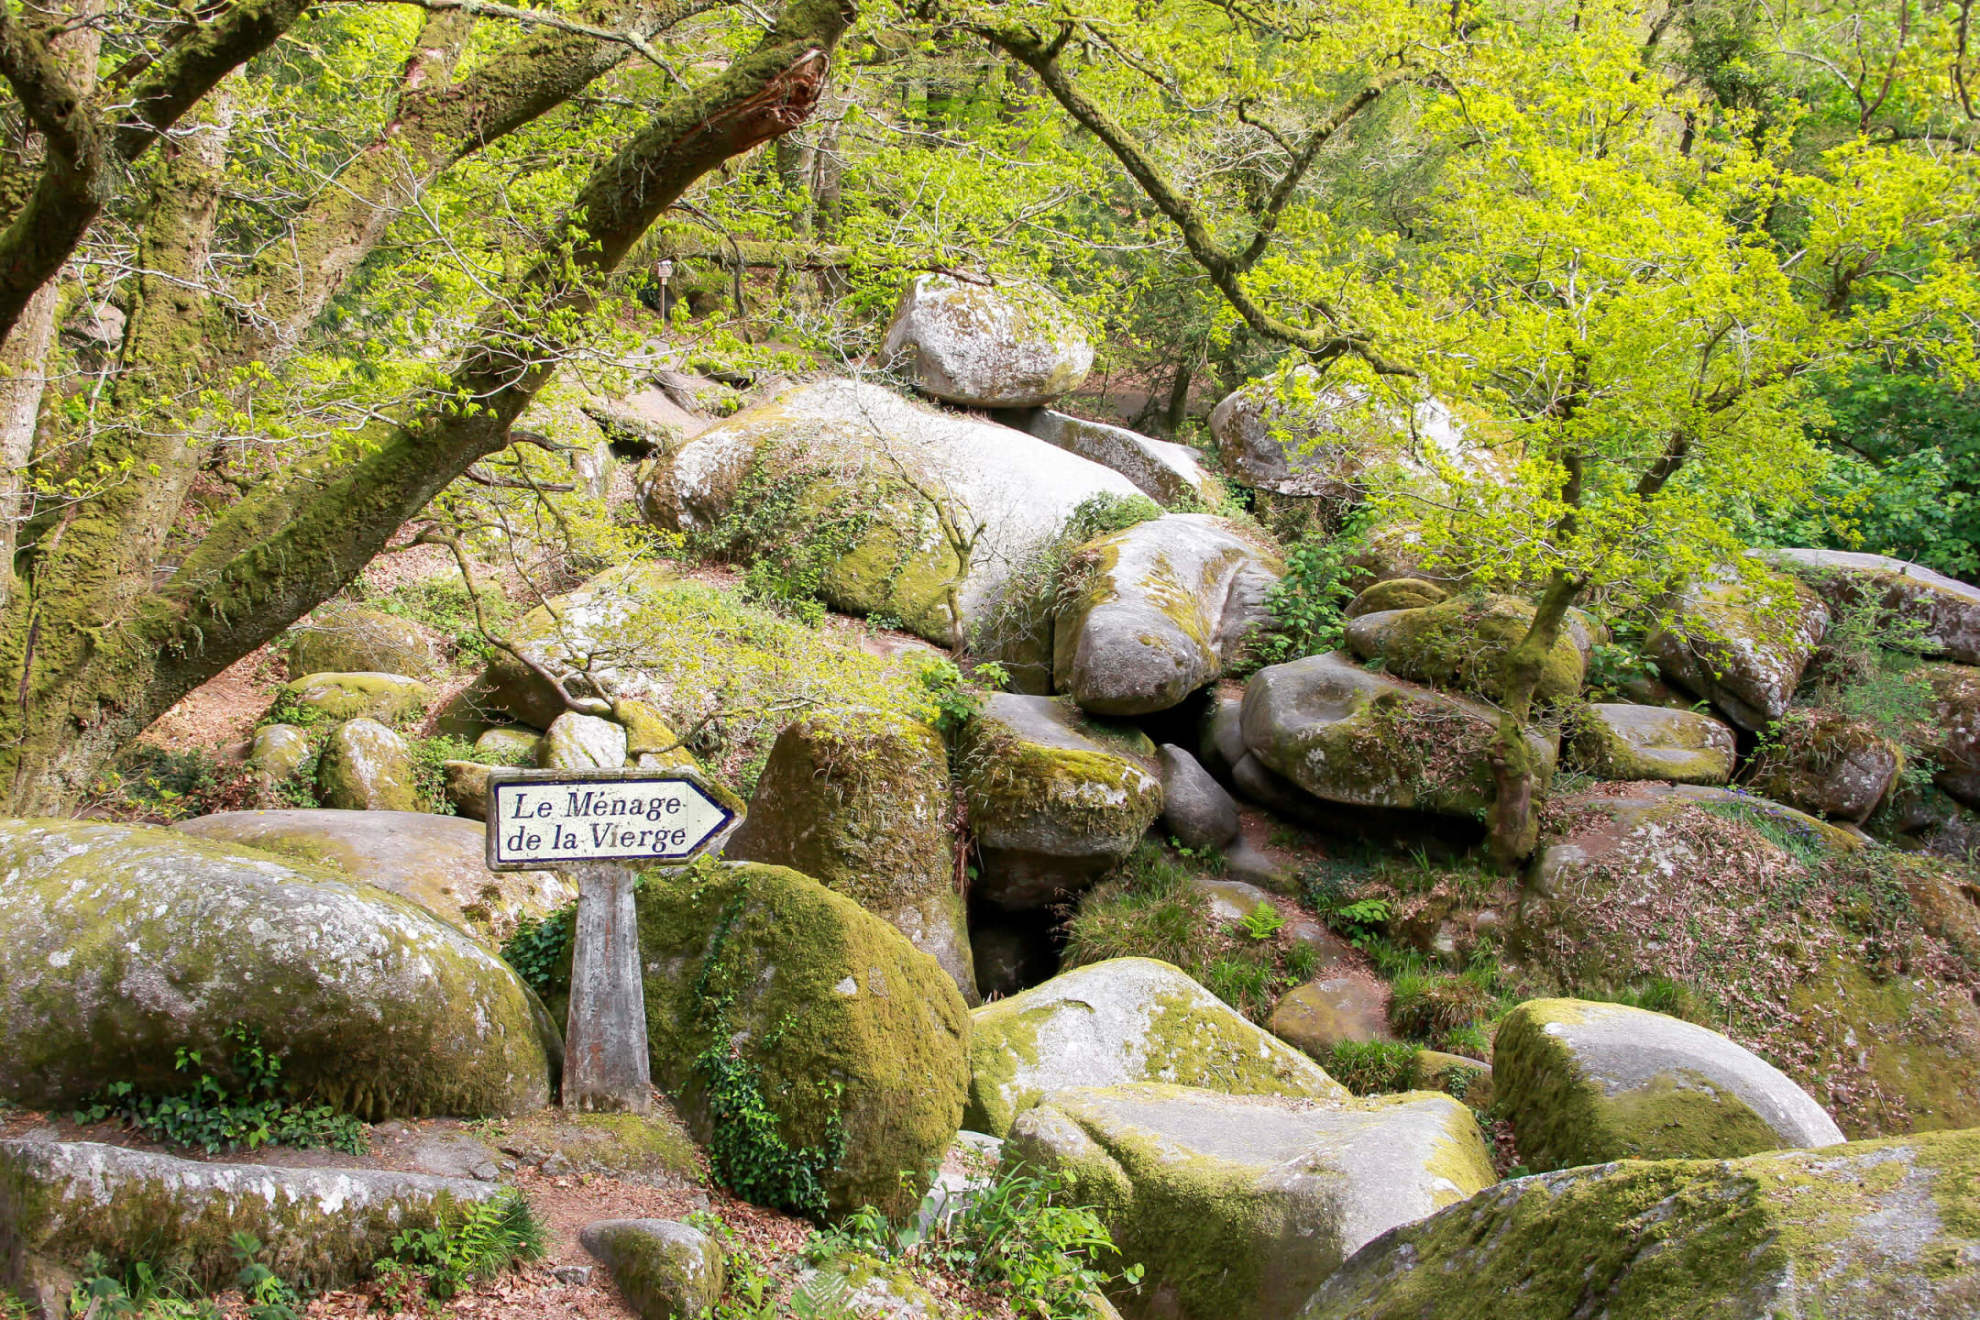 Boulders and signpost in the forest of Huelgoat © Donatienne Guillaudeau, BRTC